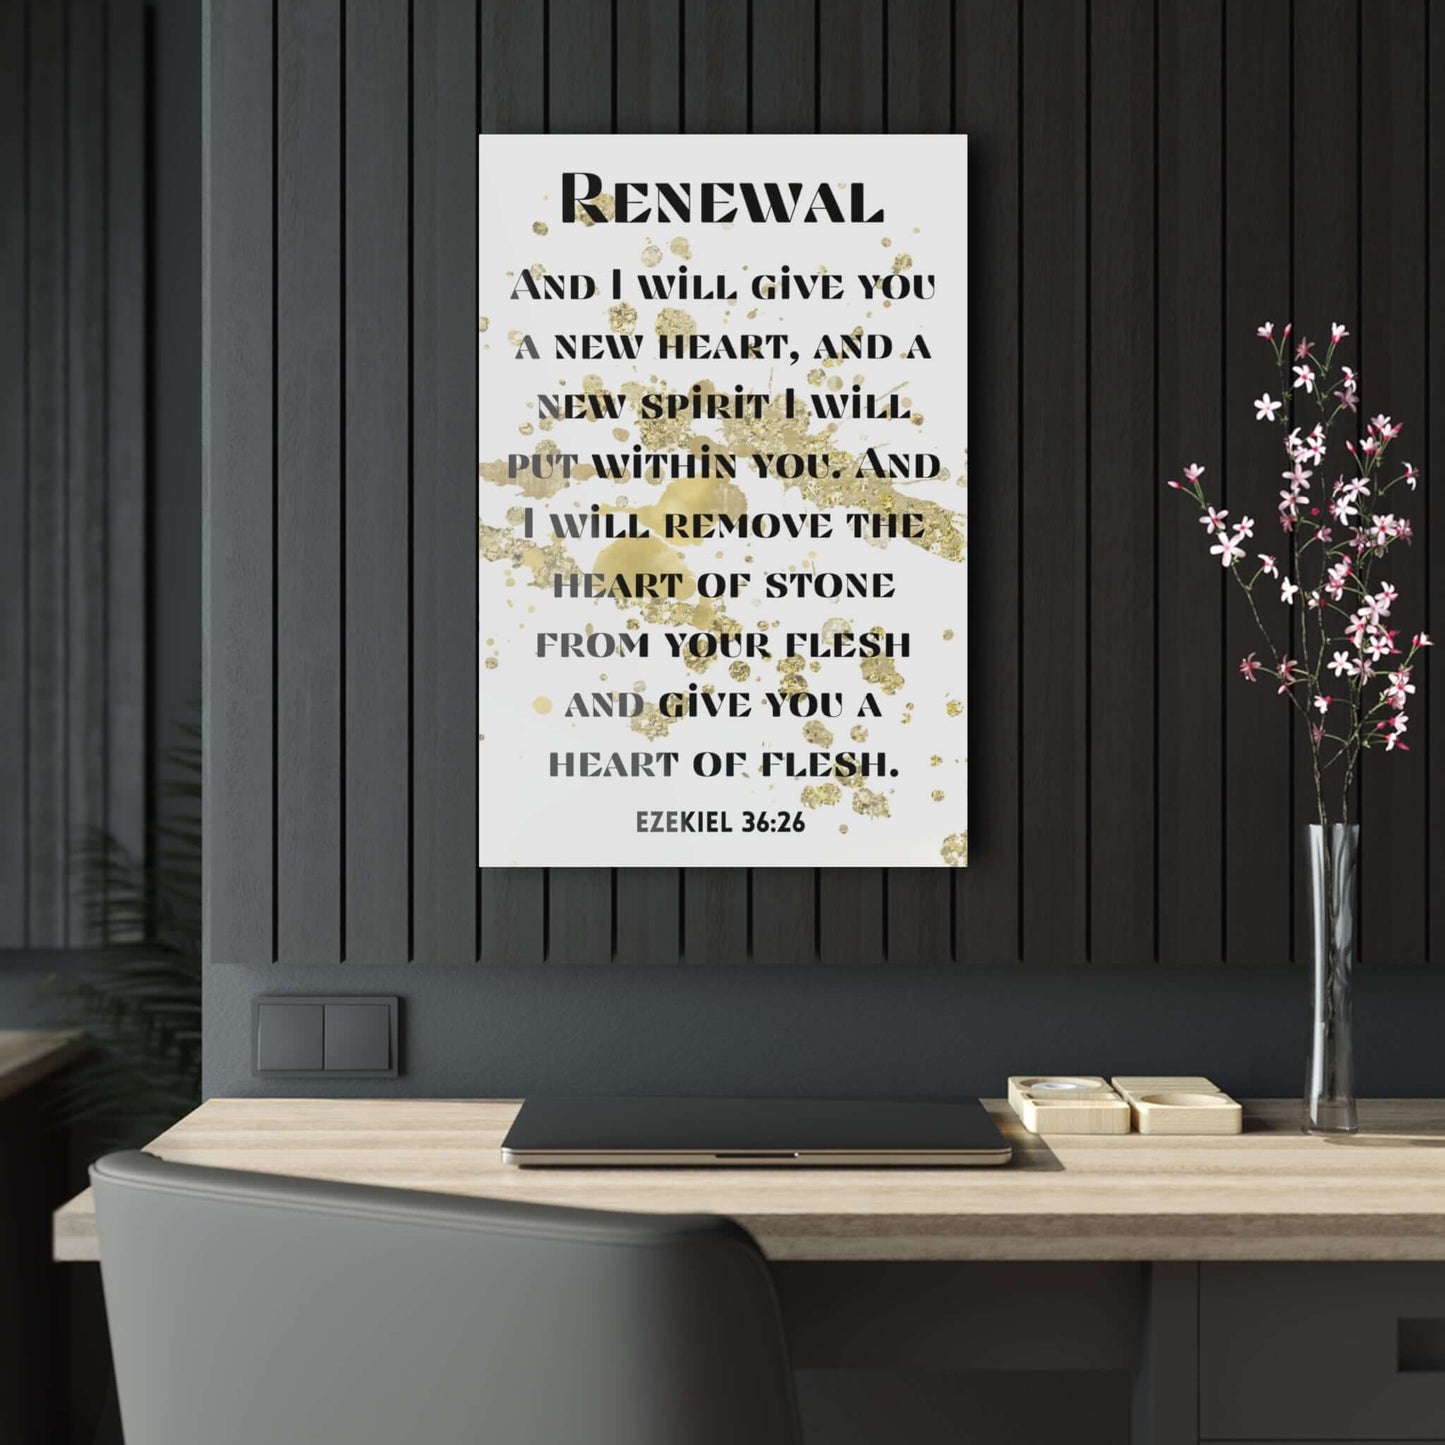 Cute Artwork - Acrylic Wall Art with Inspirational Scripture | Art & Wall Decor,Assembled in the USA,Assembled in USA,Decor,Home & Living,Home Decor,Indoor,Made in the USA,Made in USA,Poster